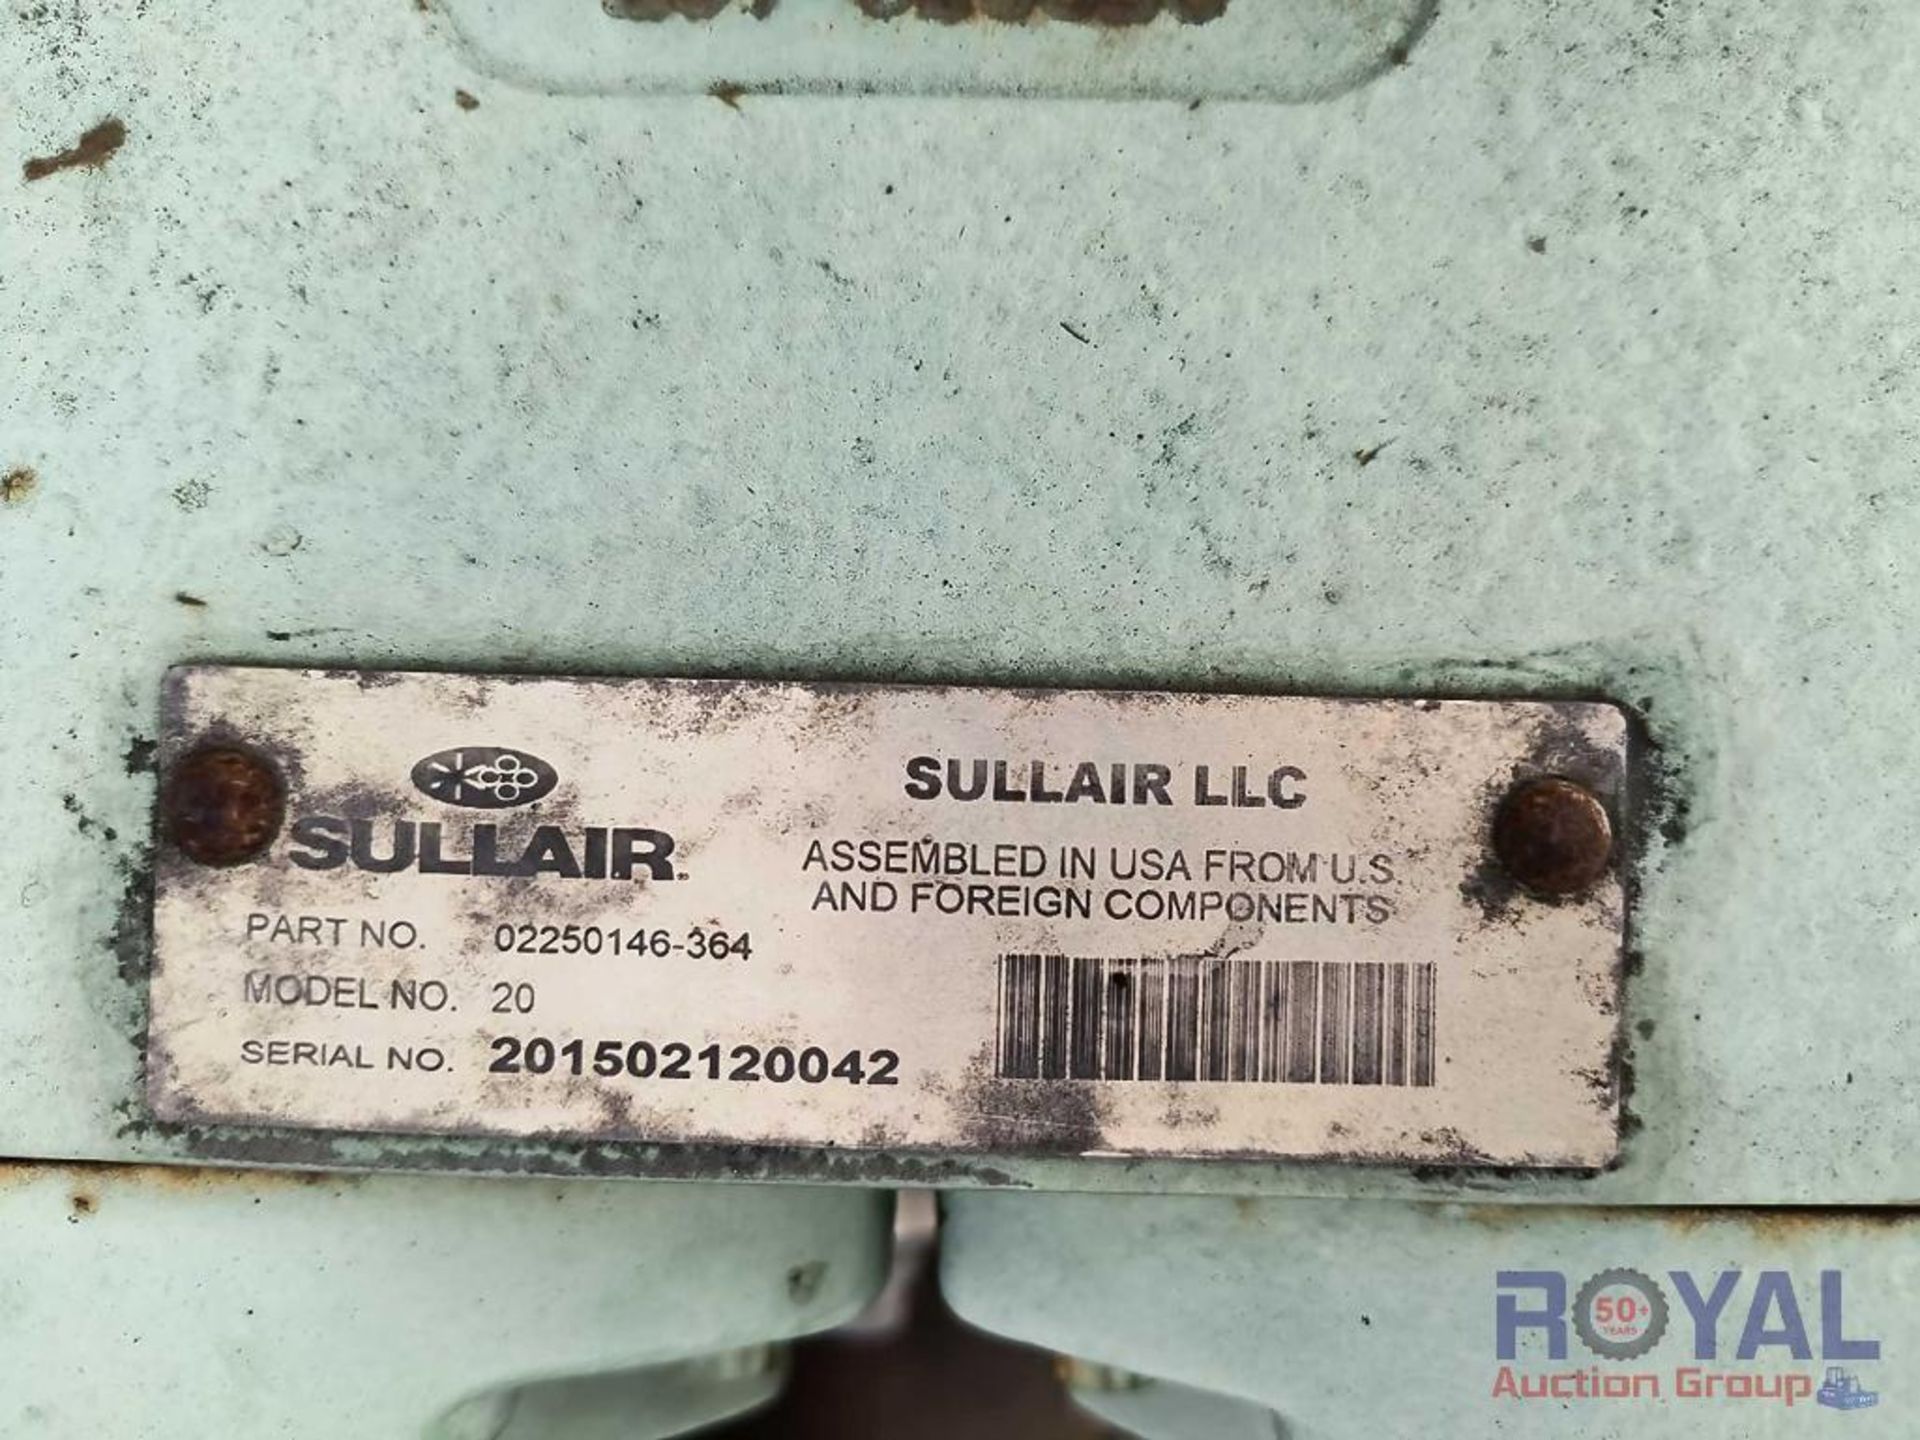 Sullair V-200S Rotary Screw Air Compressor With Dryer - Image 18 of 19